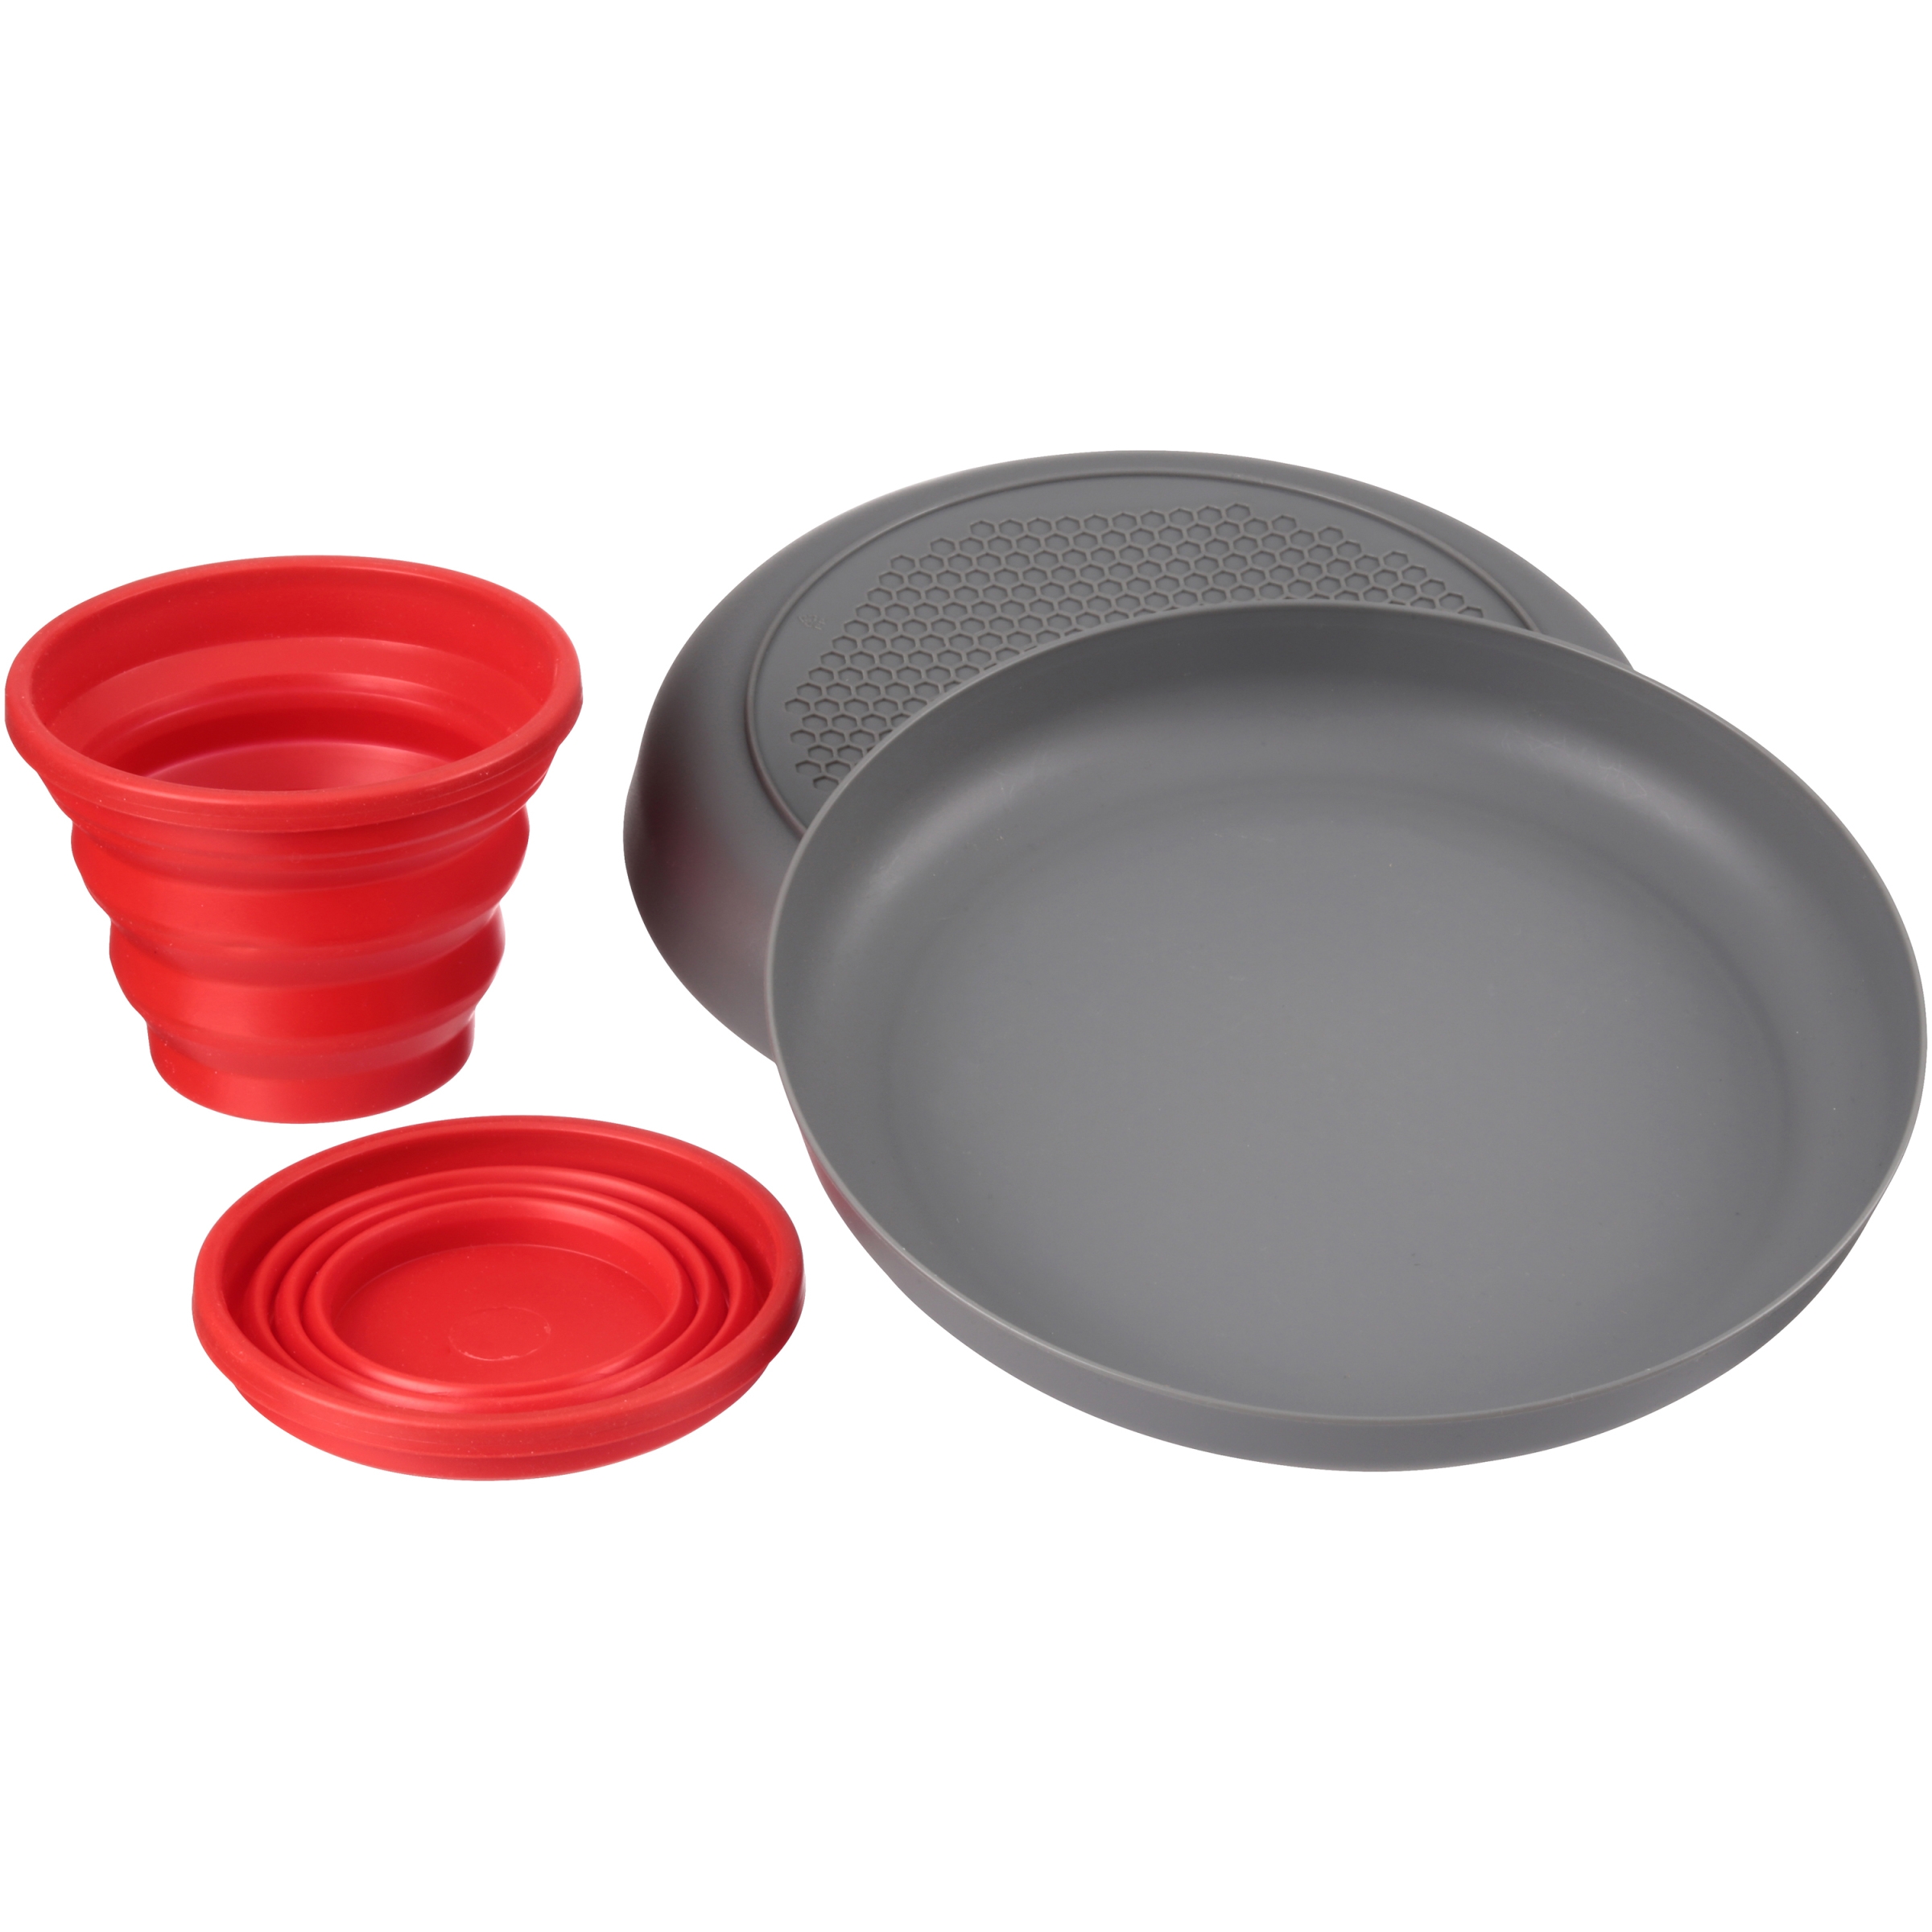 Ozark Trail 11 Piece Silicone Camping Mess Kit - image 5 of 8